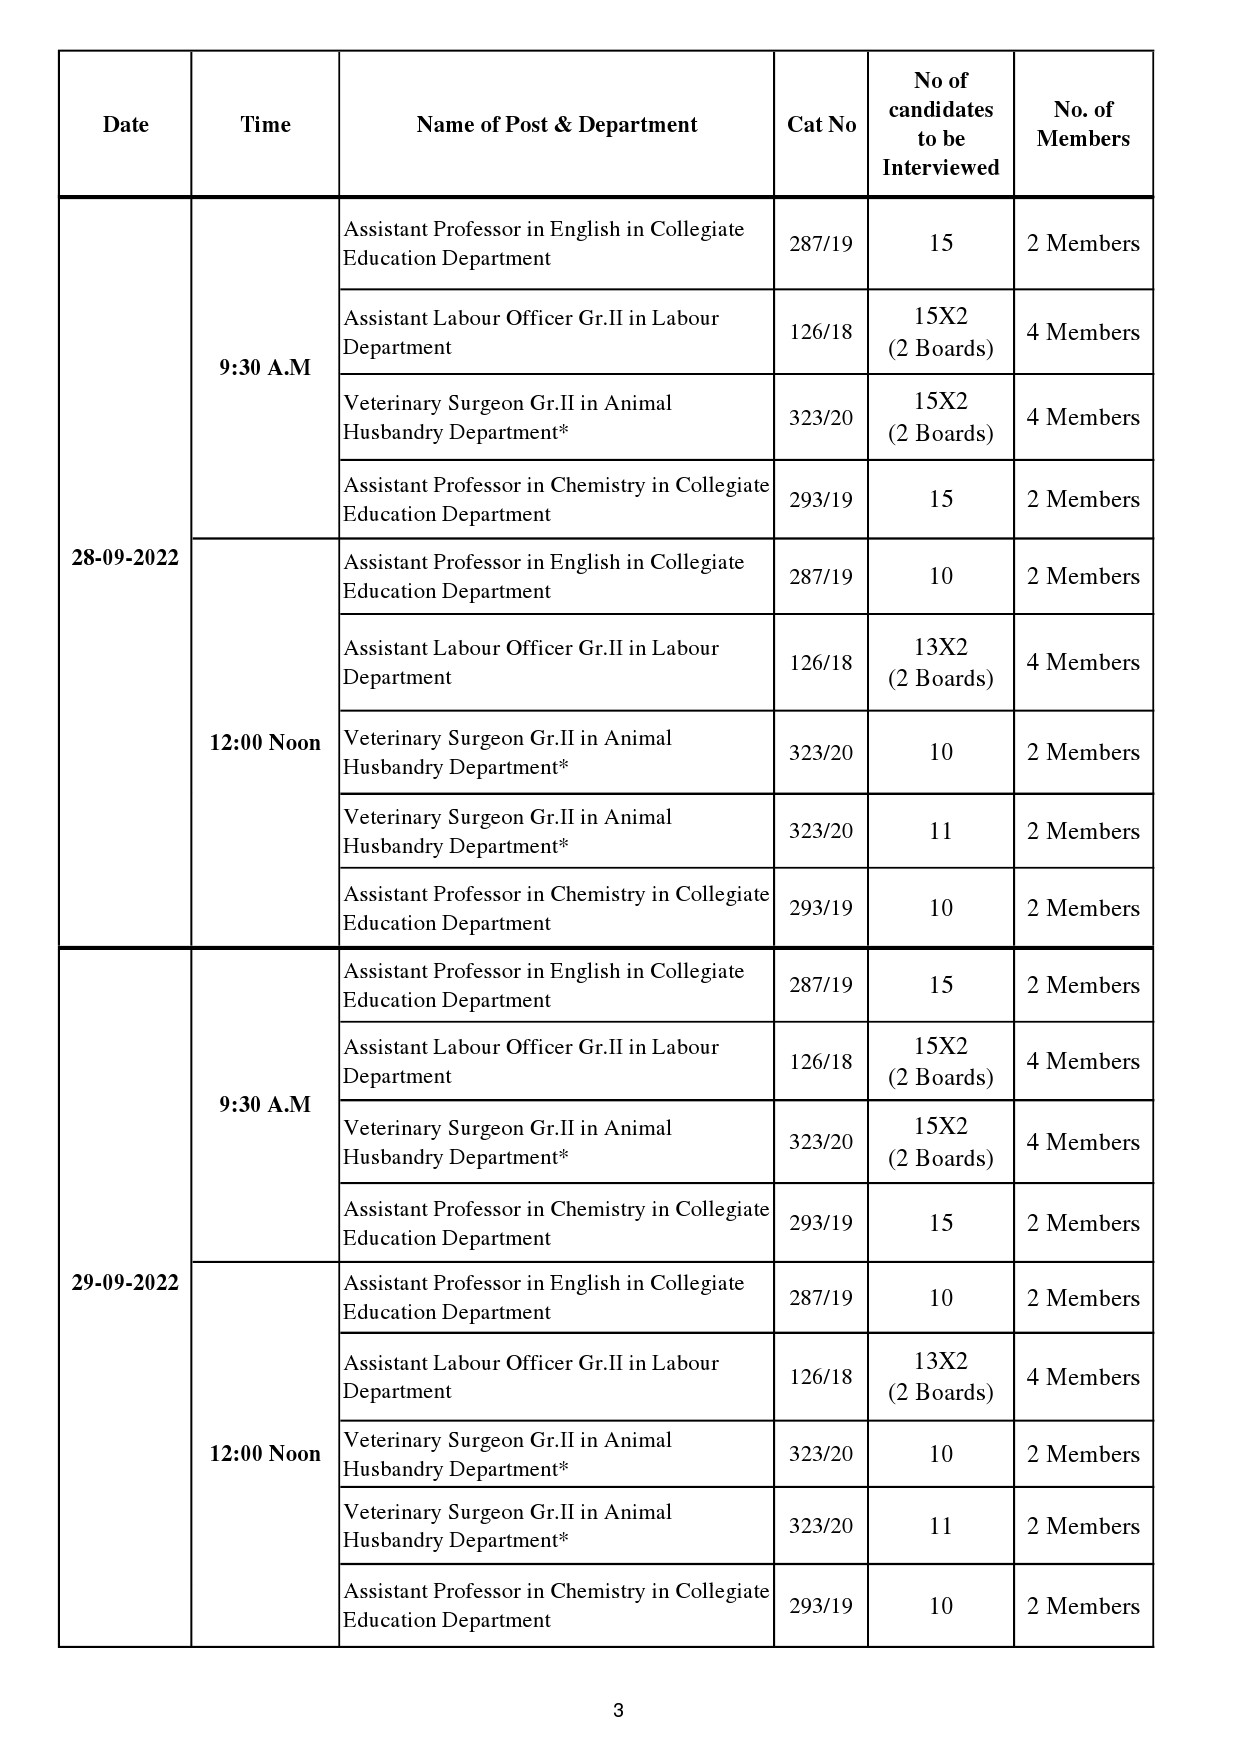 Interview Programme For The Month Of September 2022 - Notification Image 3